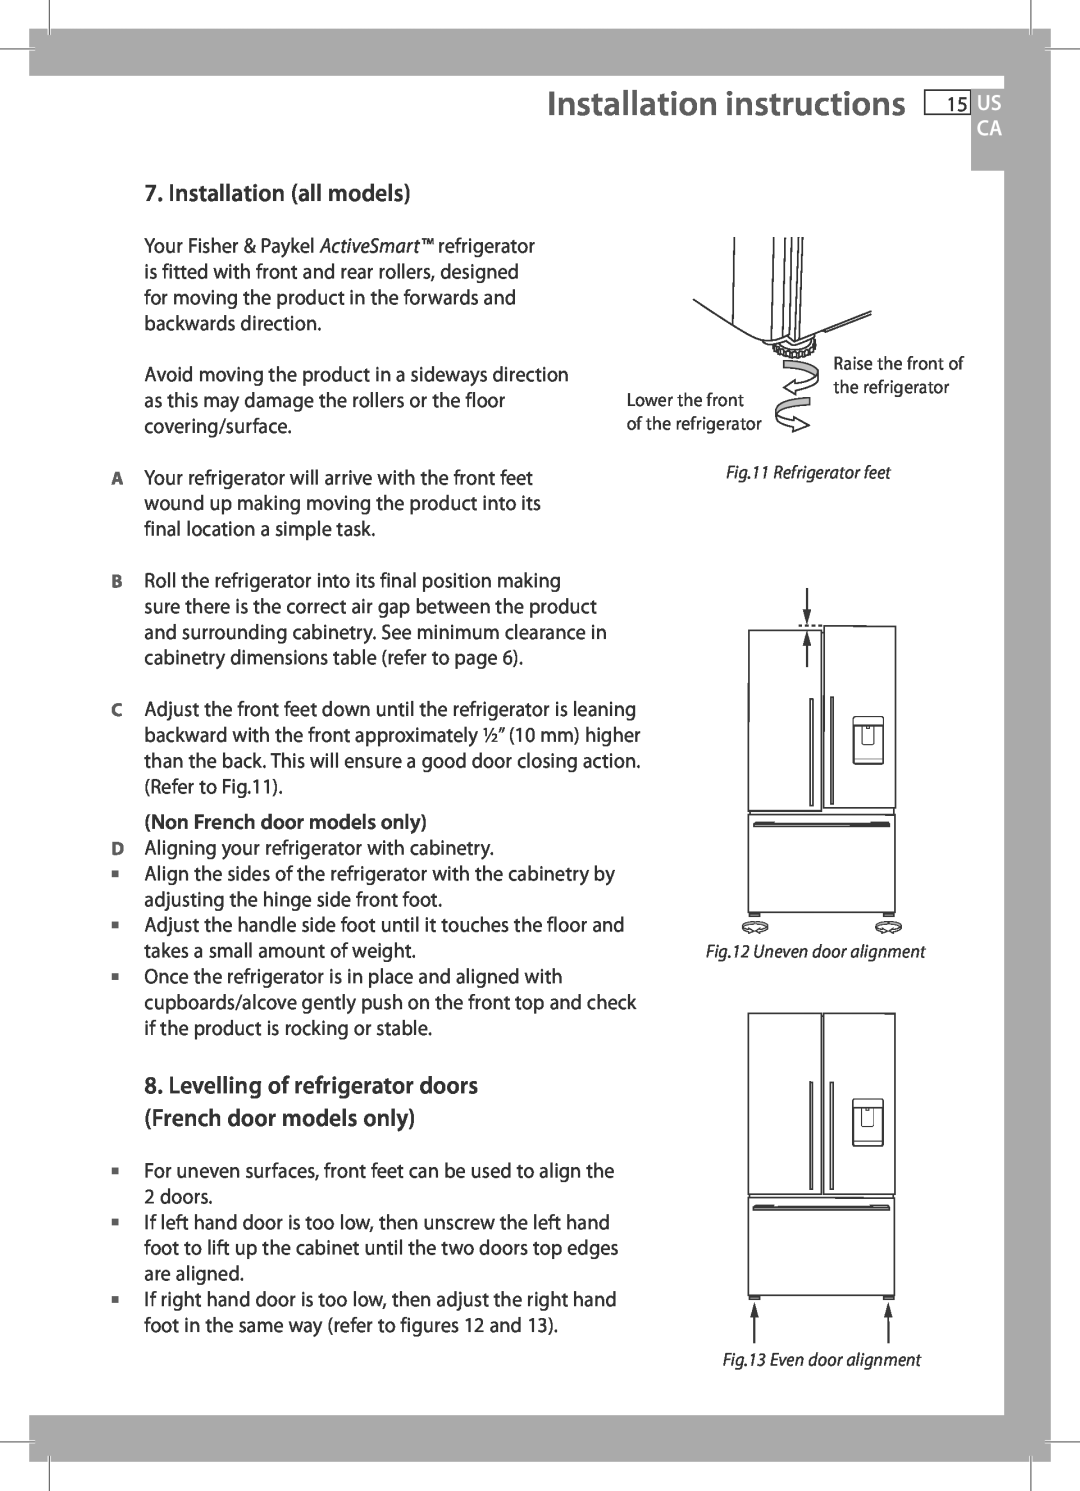 Fisher & Paykel RF201A, RF170W Installation instructions, Installation all models, 15US CA, Non French door models only 